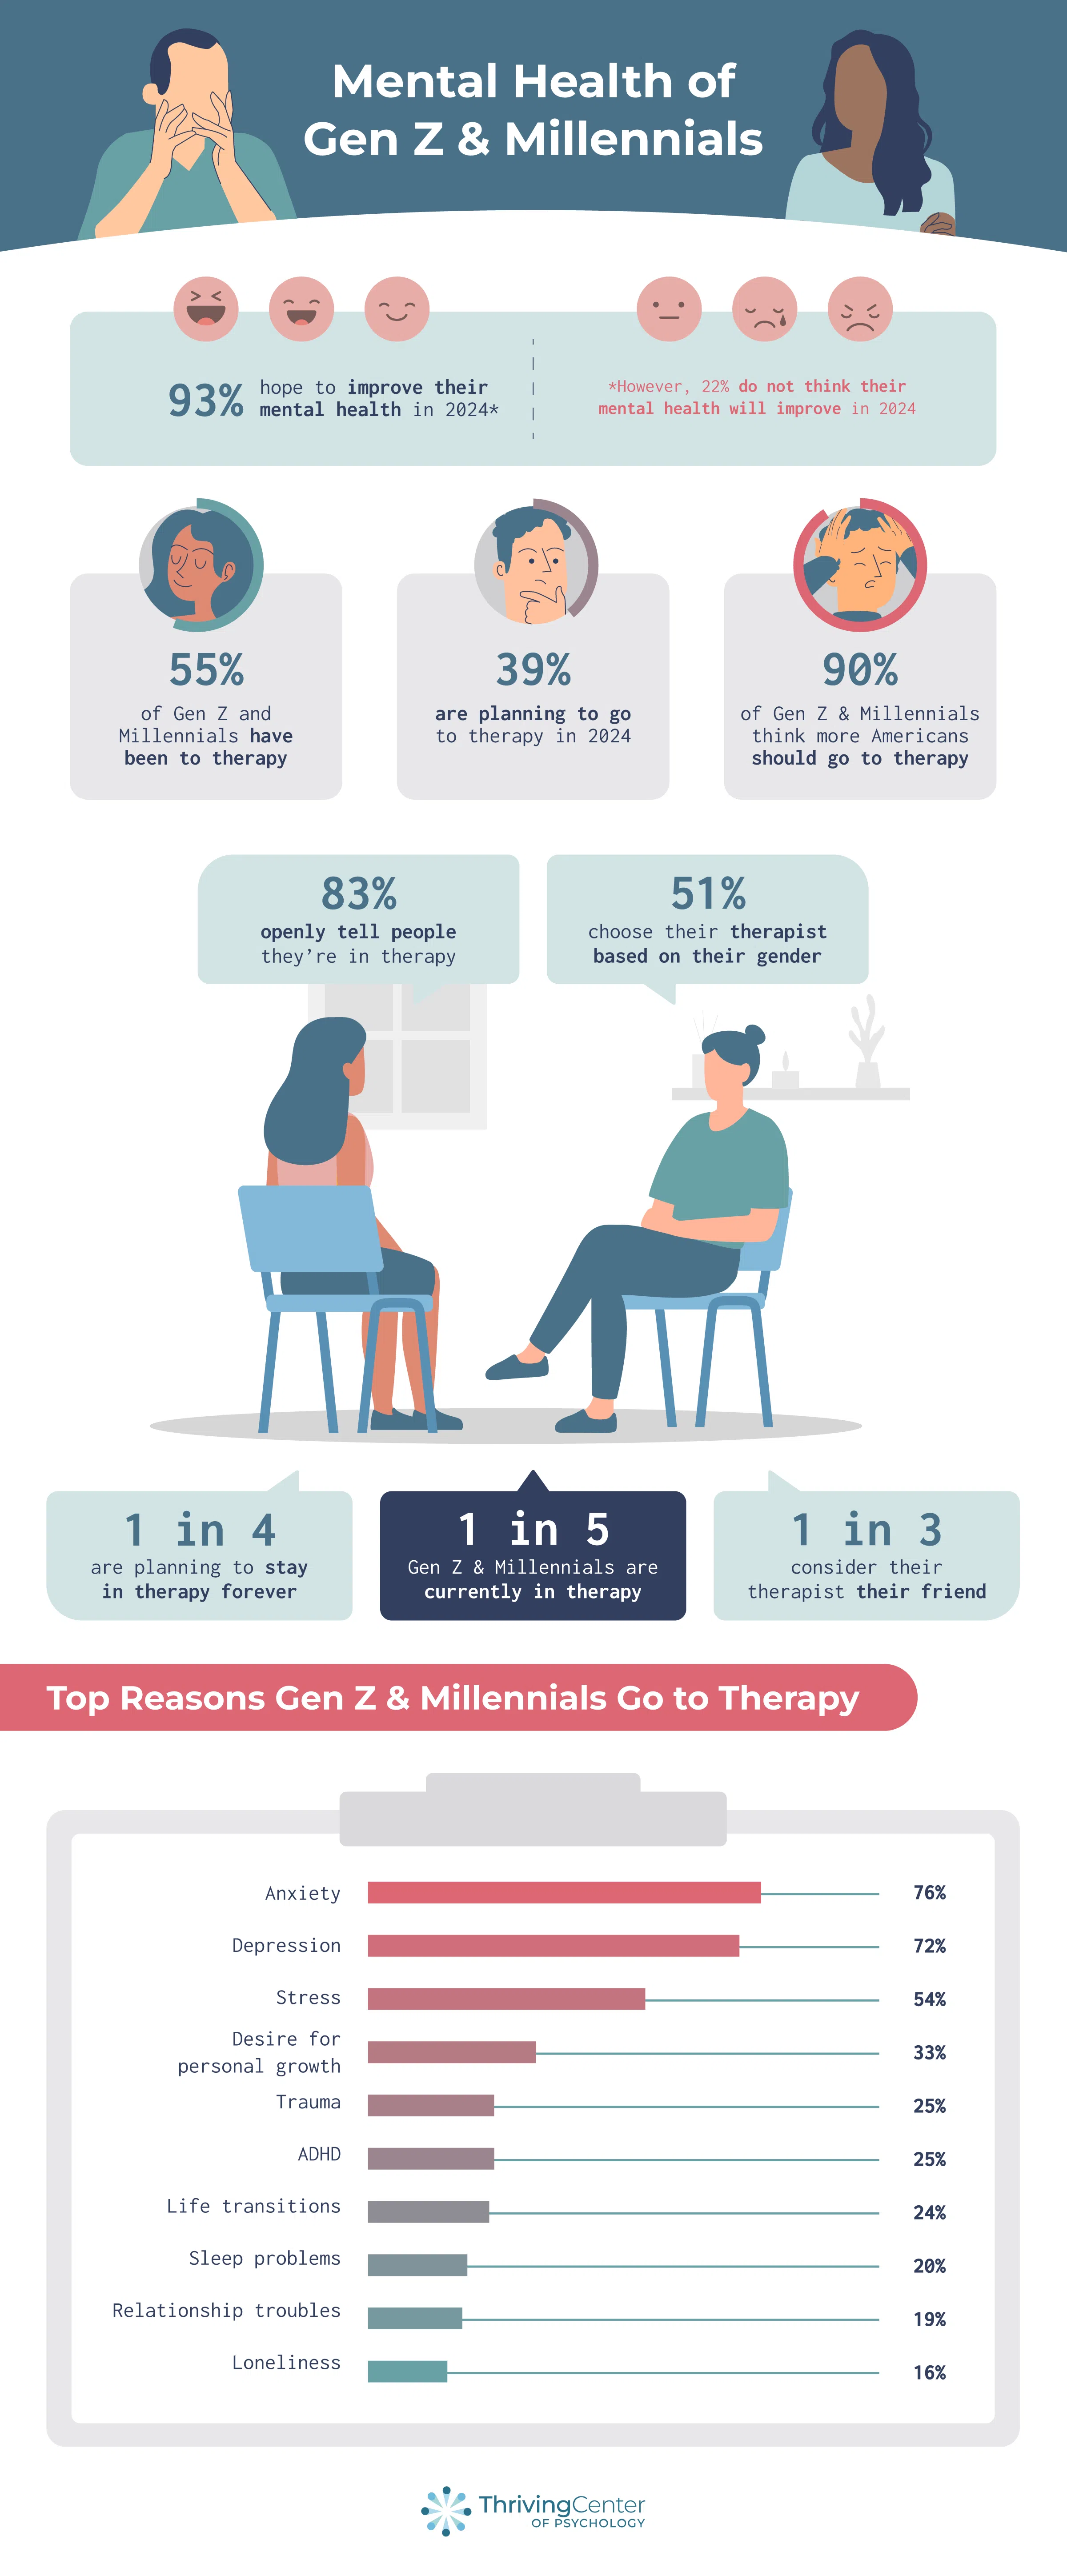 Top Reasons Millennials & Gen Z go to Therapy - report by thrivingcenterofpsych.com